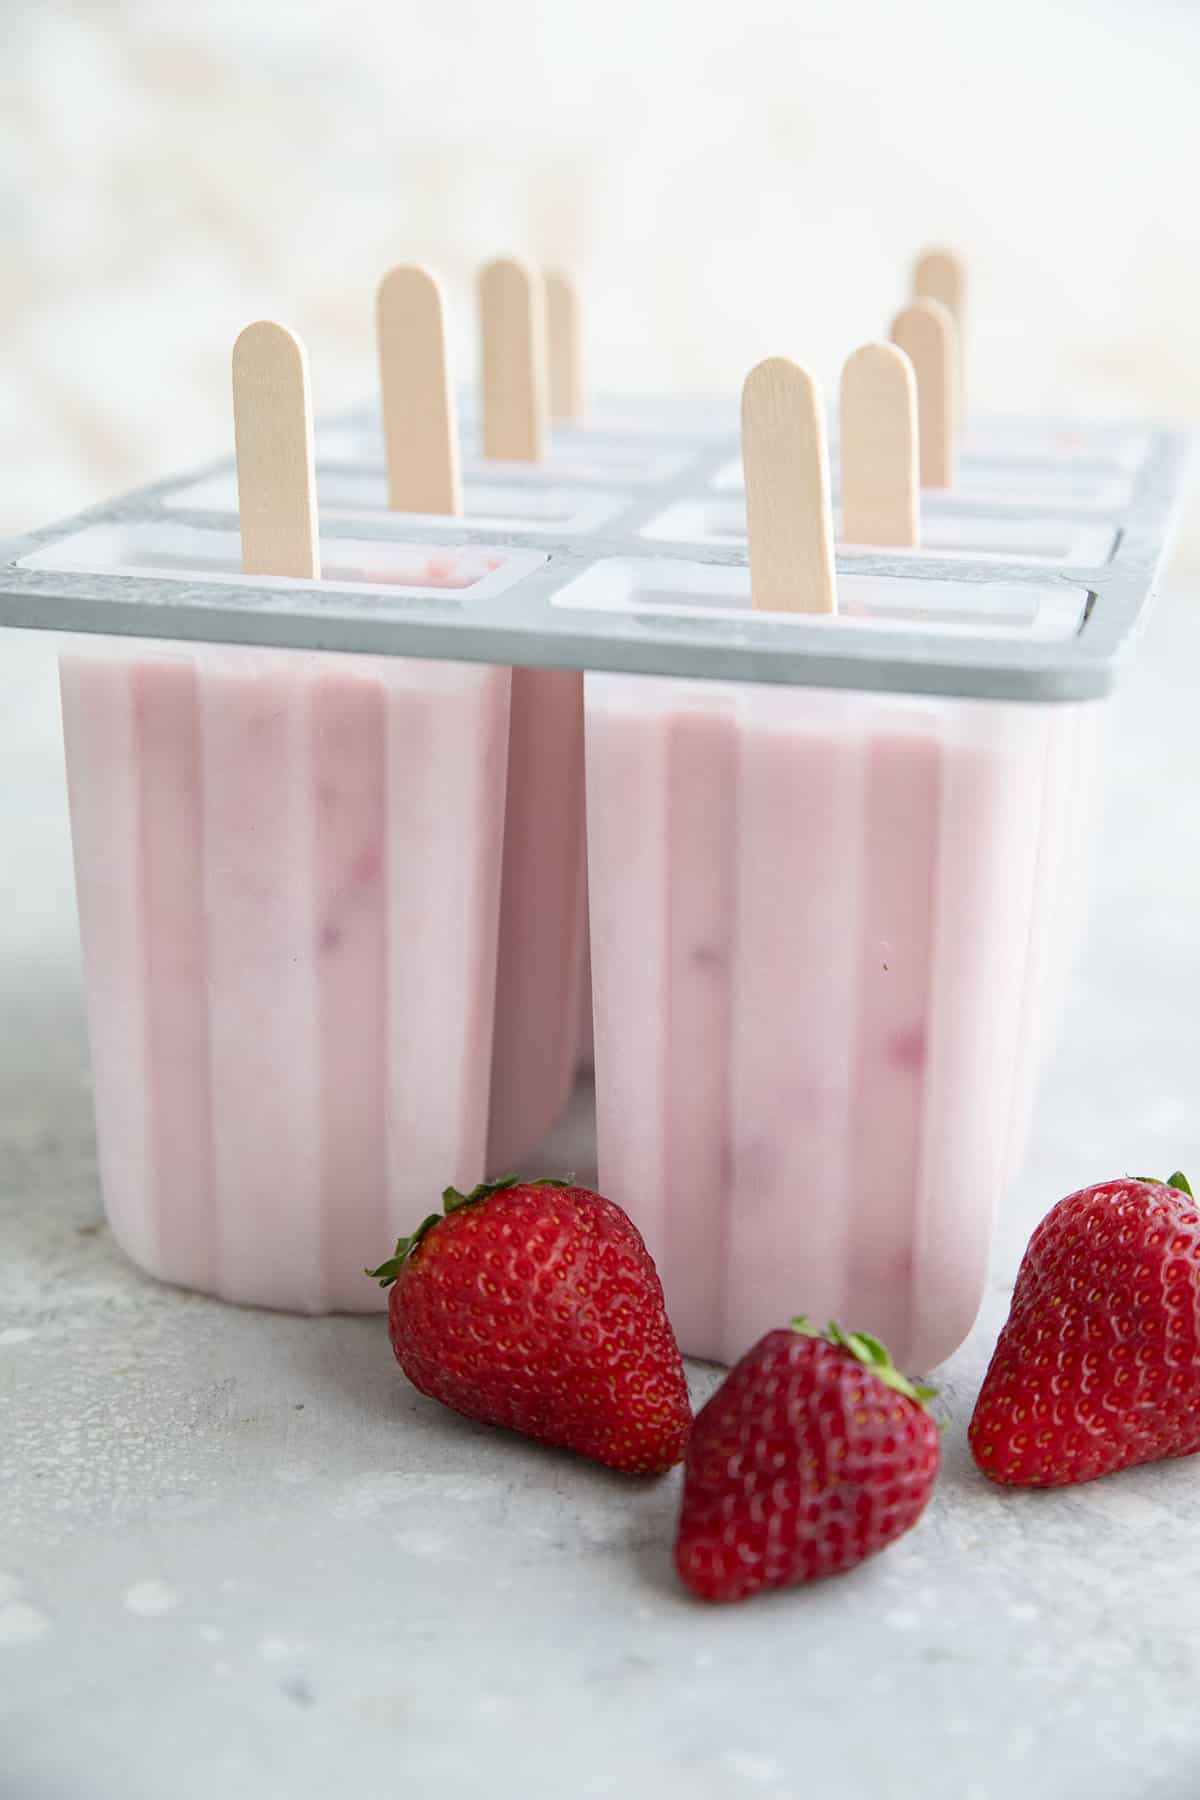 Strawberry Cheesecake Popsicles in the popsicle mold with fresh berries in front.